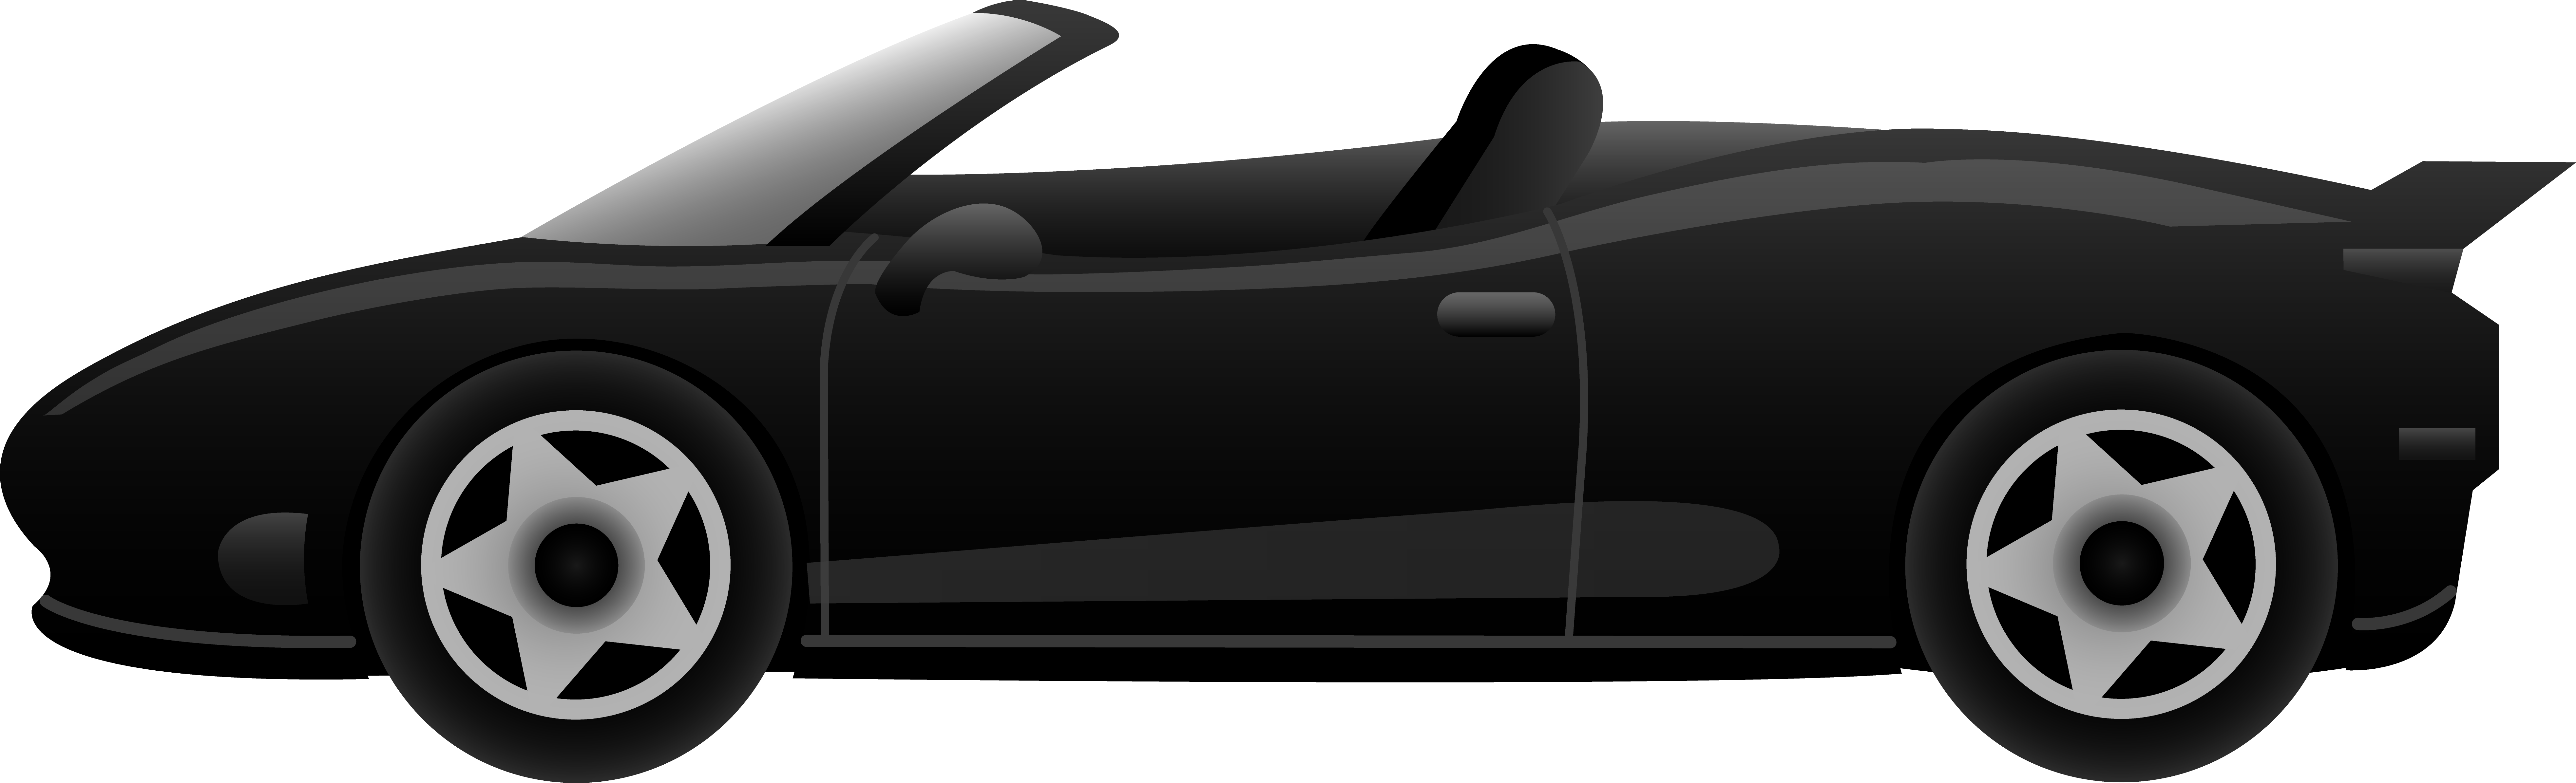 Top of indy car side view clipart - ClipartFox